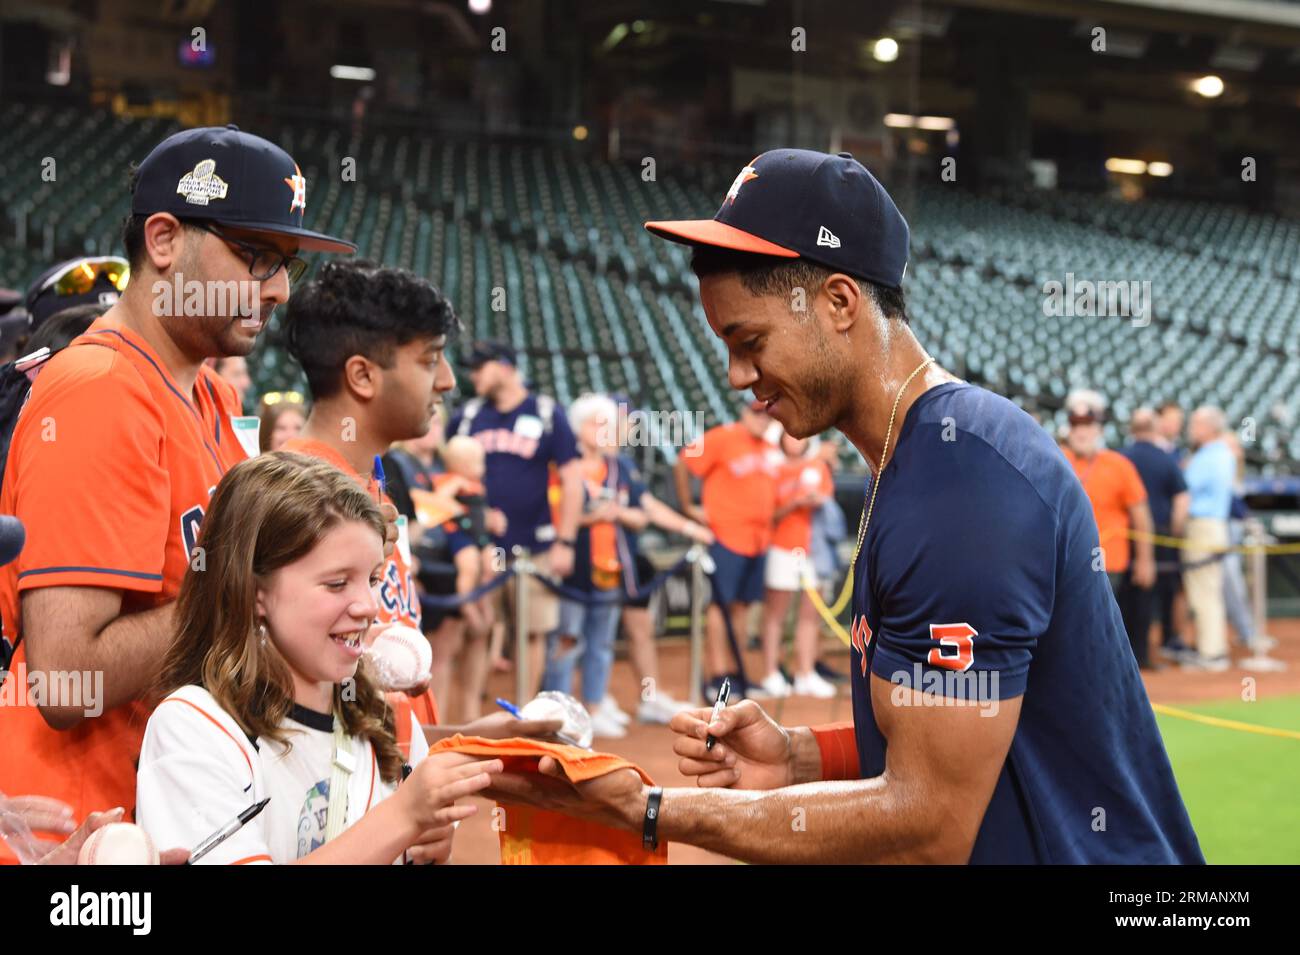 Houston Astros shortstop Jeremy Pena (3) signs an autograph for an adoring fan before the MLB game between the Boston Red Sox and the Houston Astros o Stock Photo